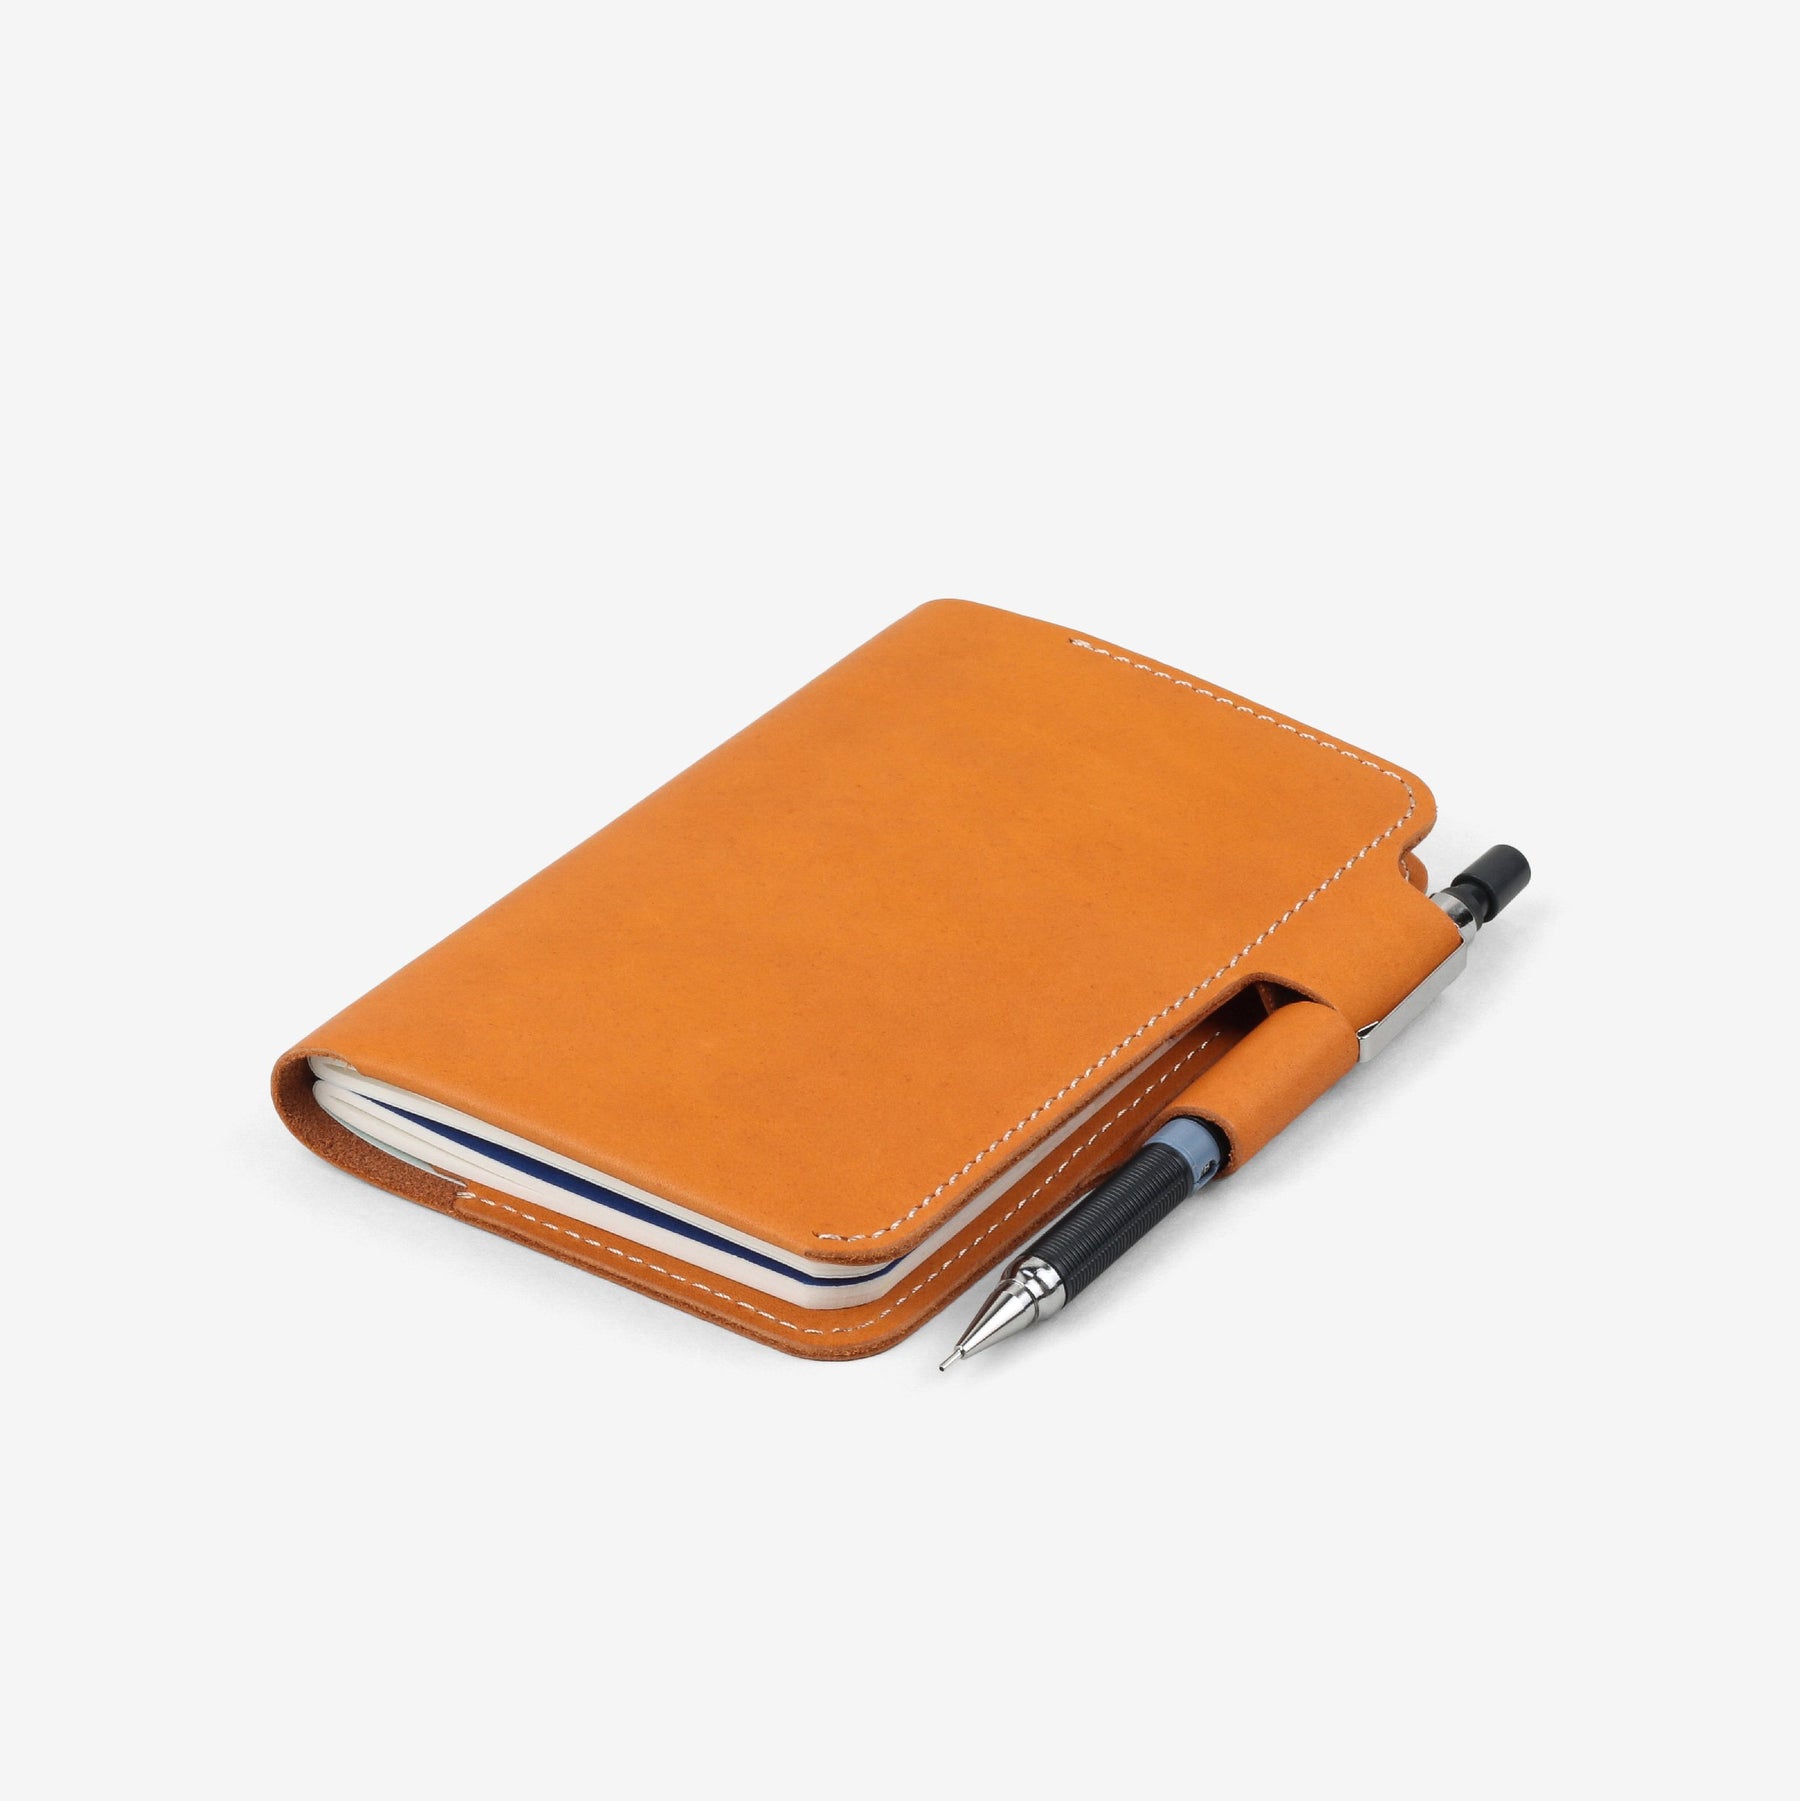 Second Chance: Bourbon Pocket Notebook Leather Sleeve